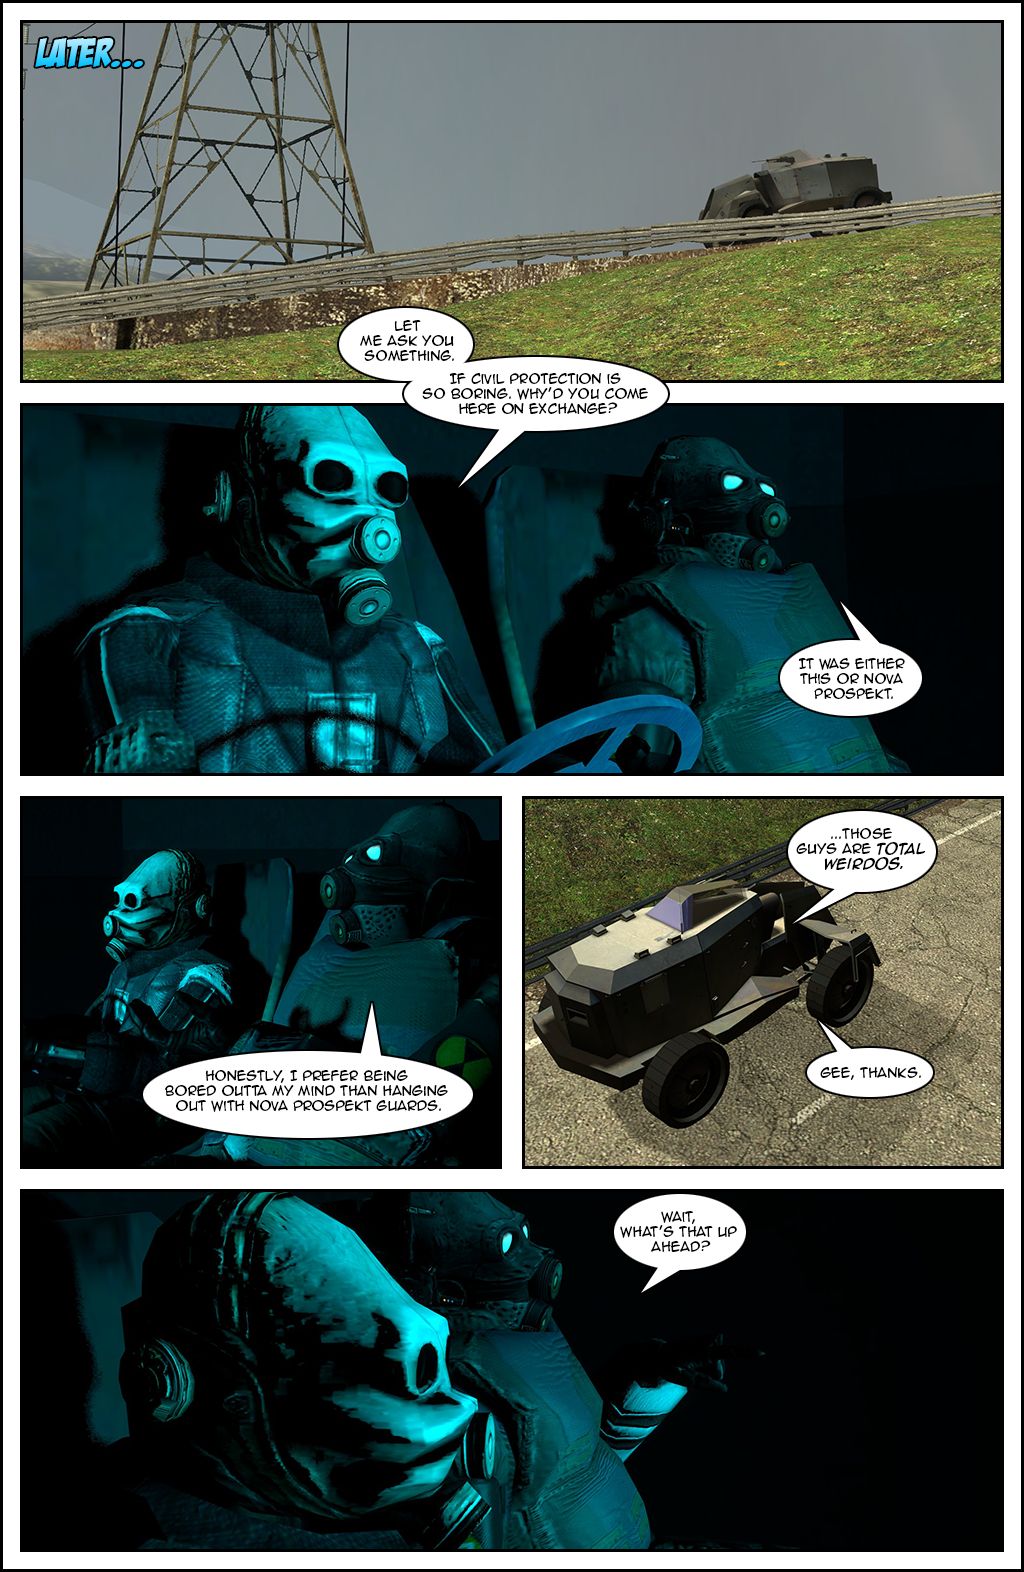 Later, as they patrol the outskirts in the armored personnel carrier, the metro cop, who is driving, asks the soldier why he came to Civil Protection on exchange if it's so boring. The soldier replies it was either that or Nova Prospekt and admits that he prefers being bored outta his mind than hanging out with Nova Prospekt guards, saying those guys are total weirdos. The cop sarcastically says gee, thanks. The soldier then notices something up ahead and asks what it is.